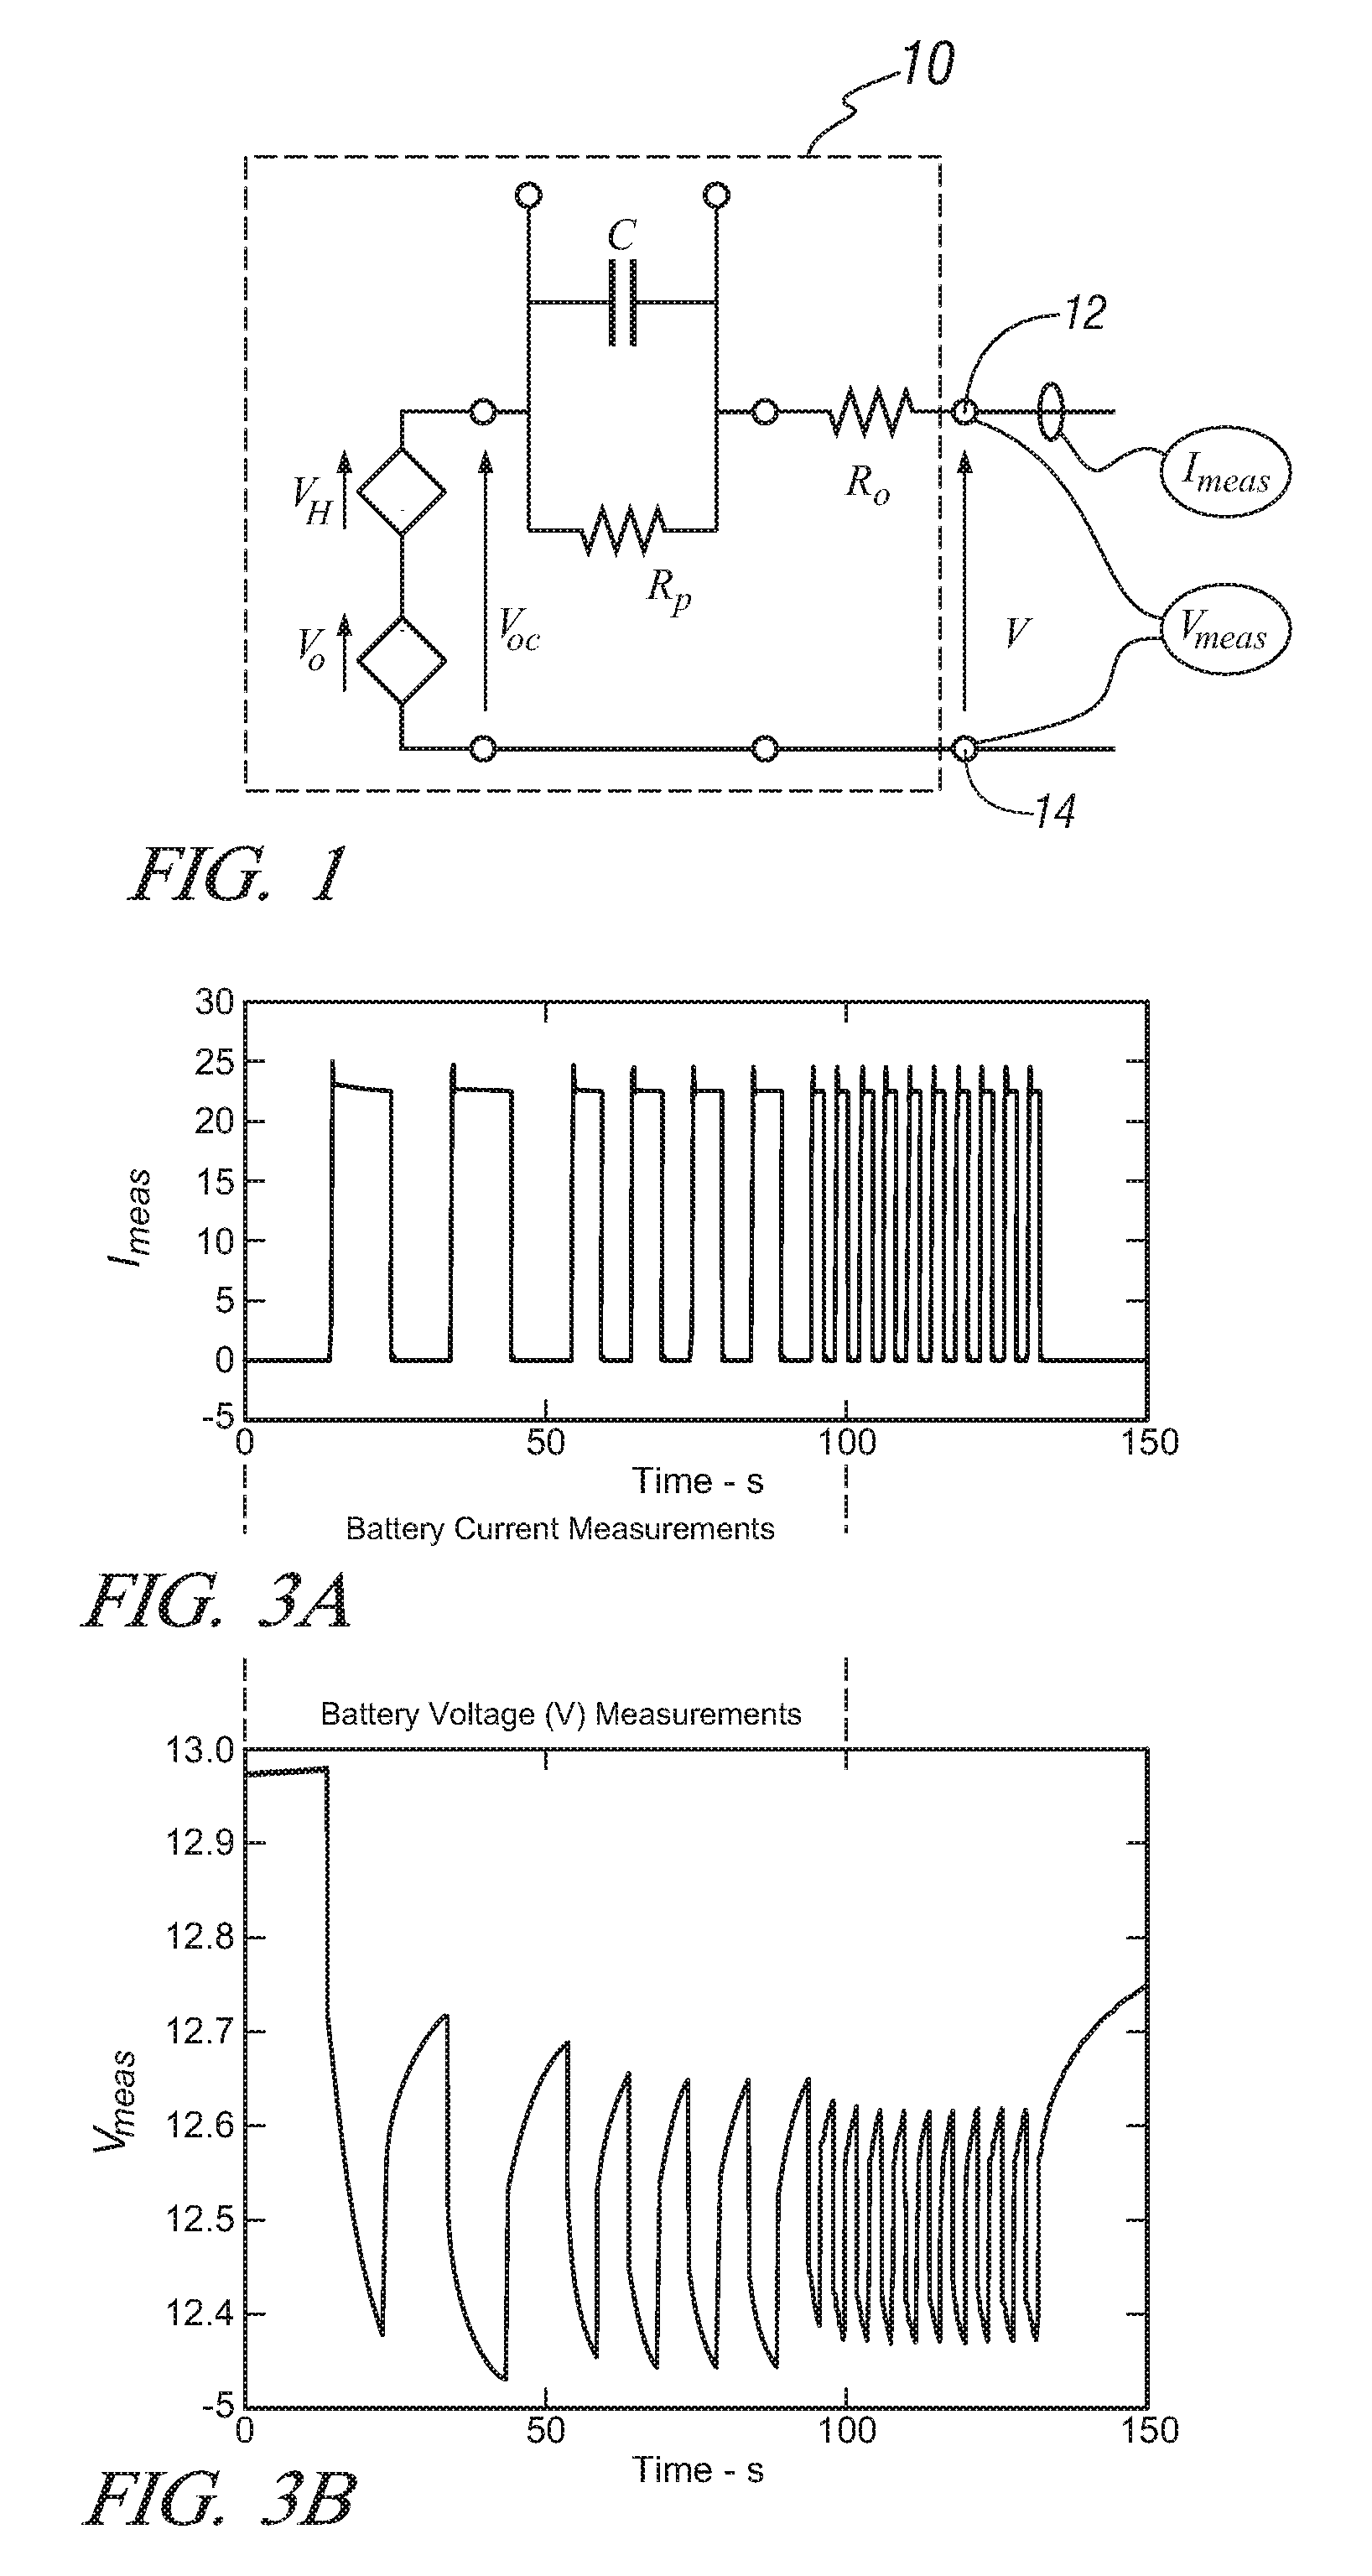 Method and article of manufacture for monitoring an electrical energy storage device